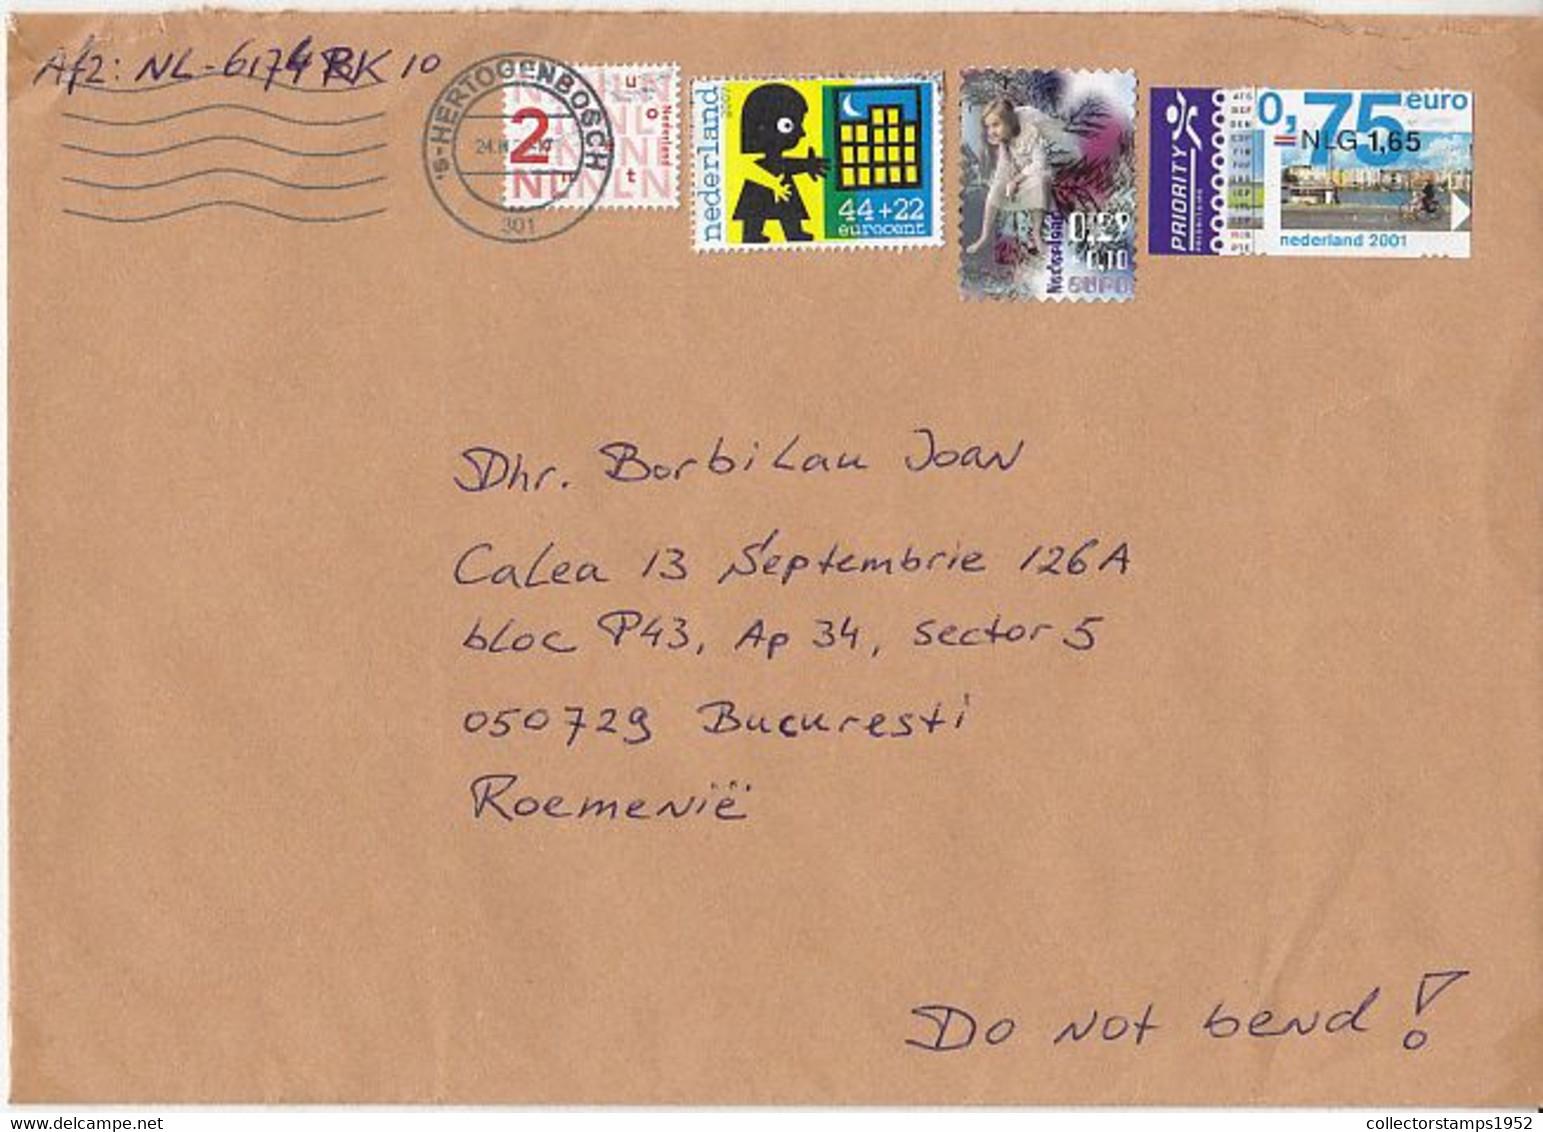 8147FM-SAFE HOUSE, CHRISTMAD, EURO STAMPS ON COVER, 2020, NETHERLANDS - Lettres & Documents